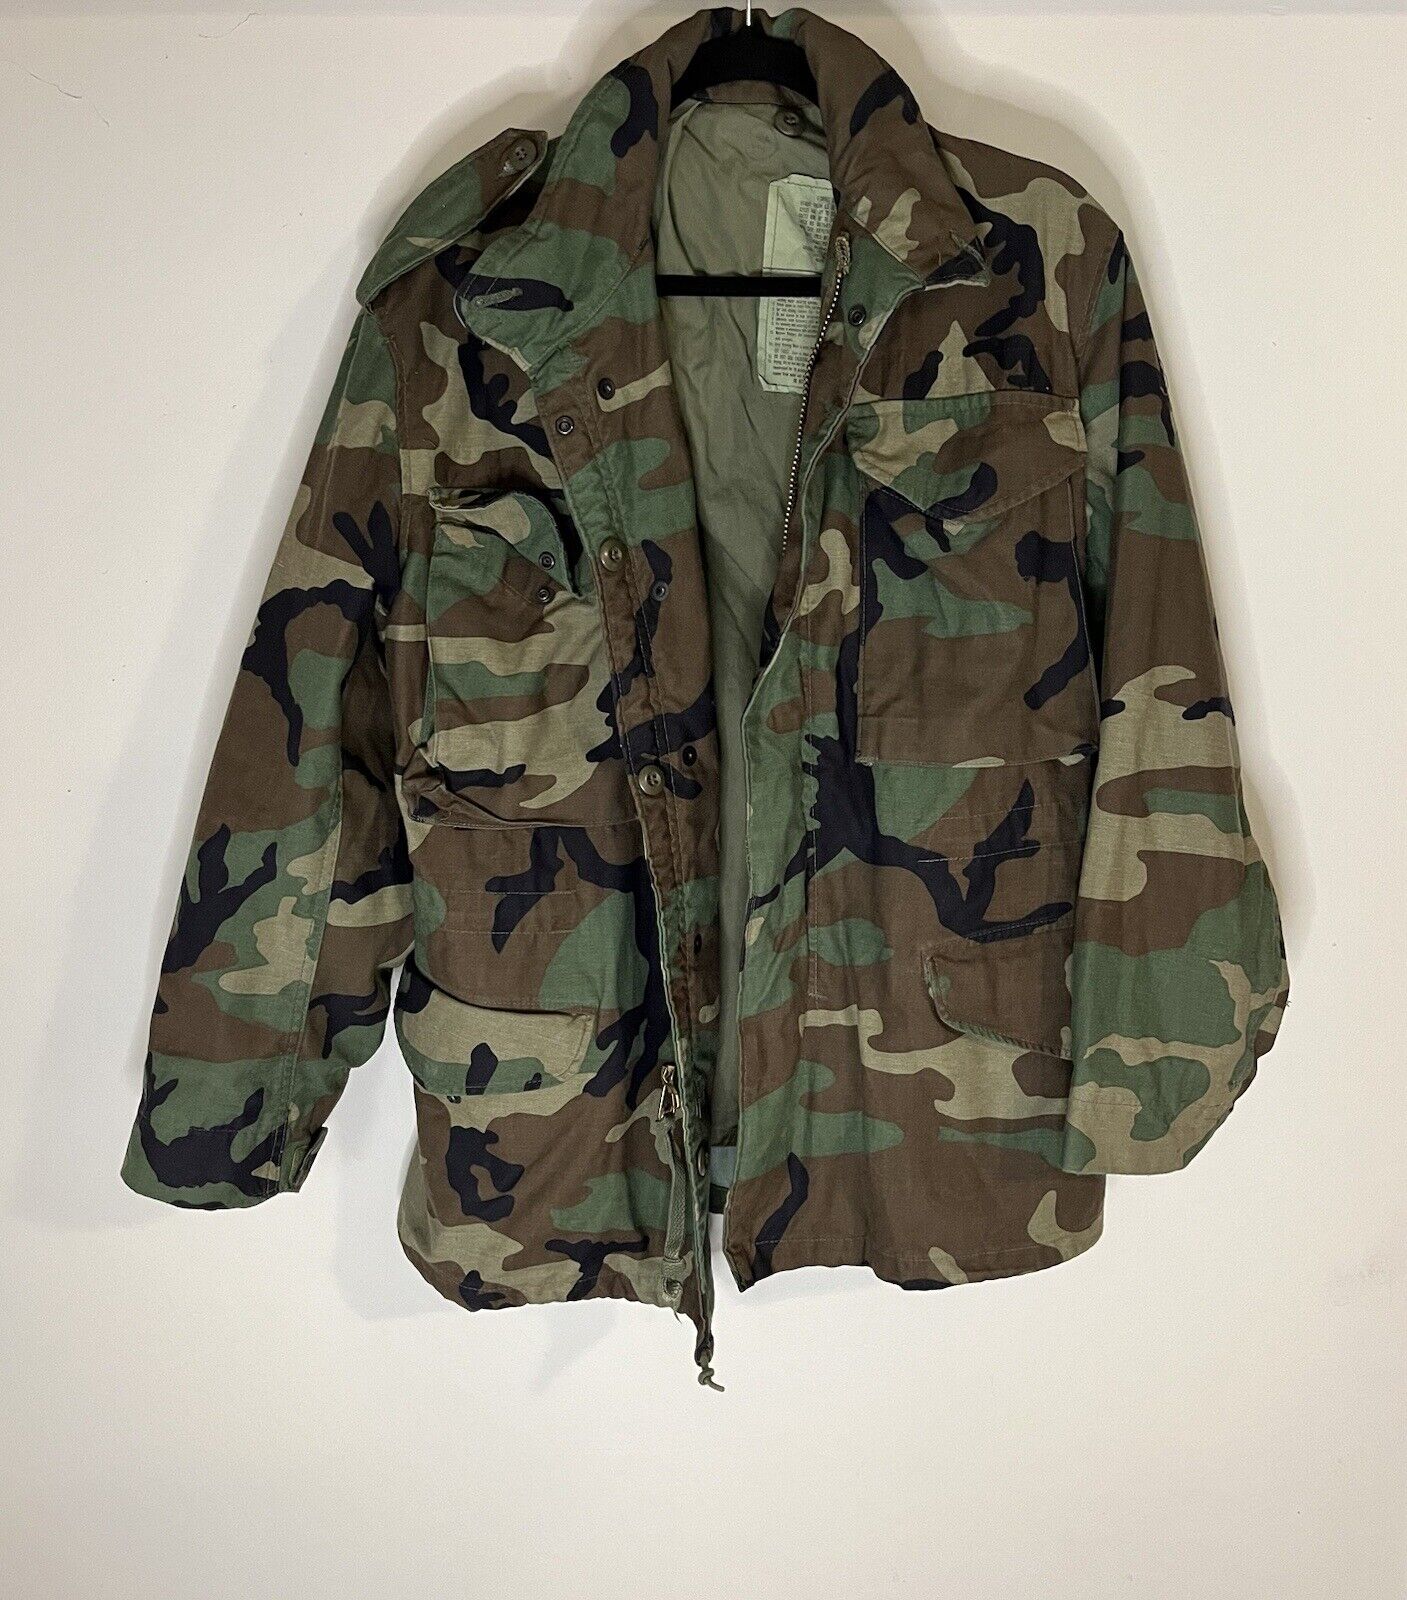 Army Military Unisex Cold Weather Field Camouflage Coat Size X-Small Short